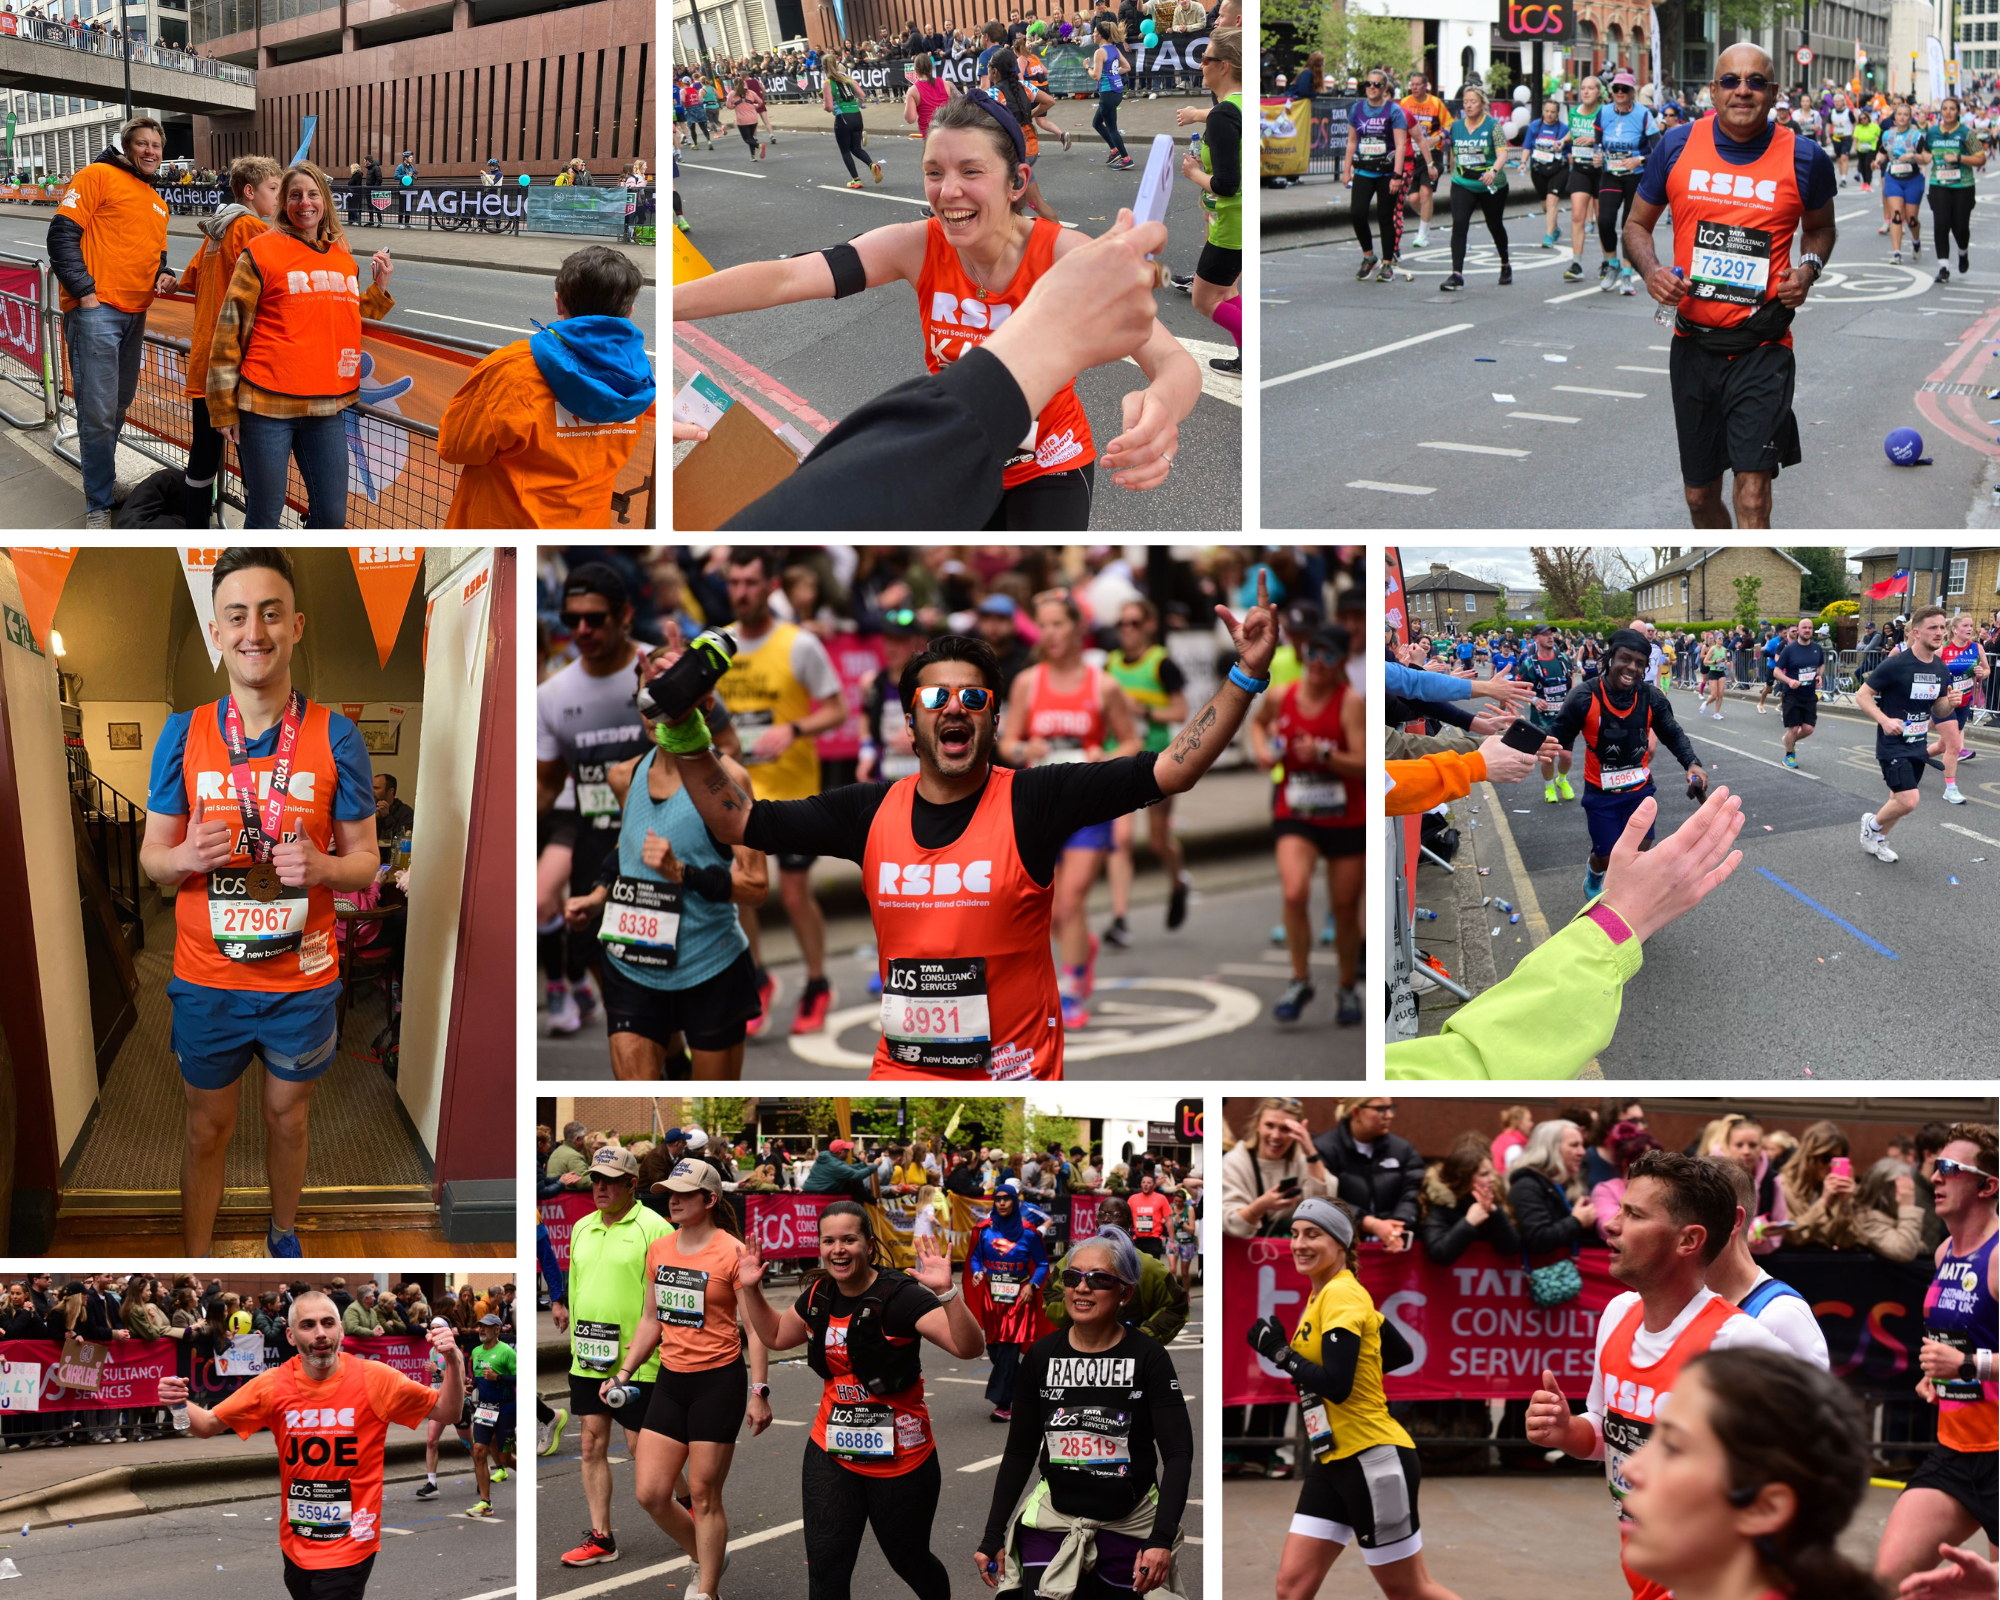 A photo album of 9 images from the London Marathon. The photos are a group shot of volunteers standing on a street awaiting runners, runners on the street of London - some waving to the crowd, and runners posing with their medals.